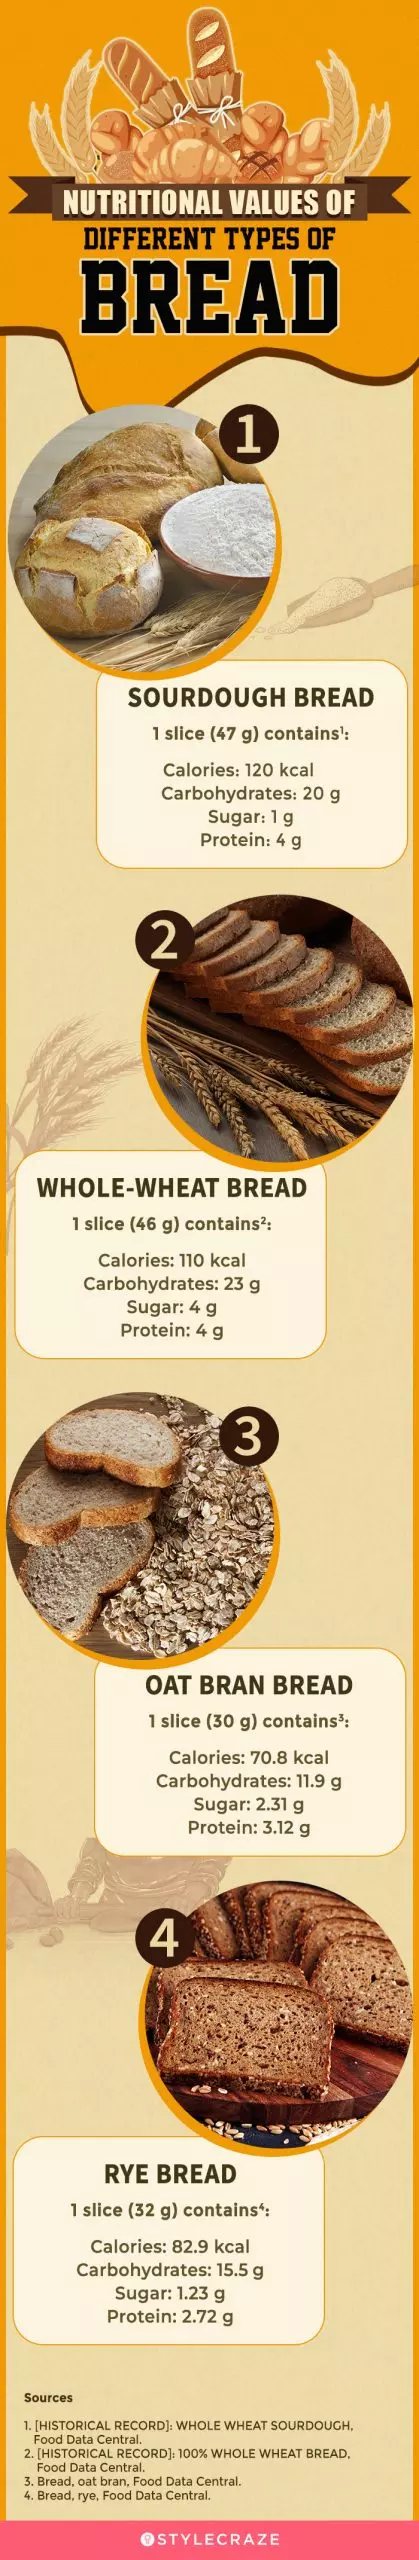 nutritional values of different types of bread(infographic)